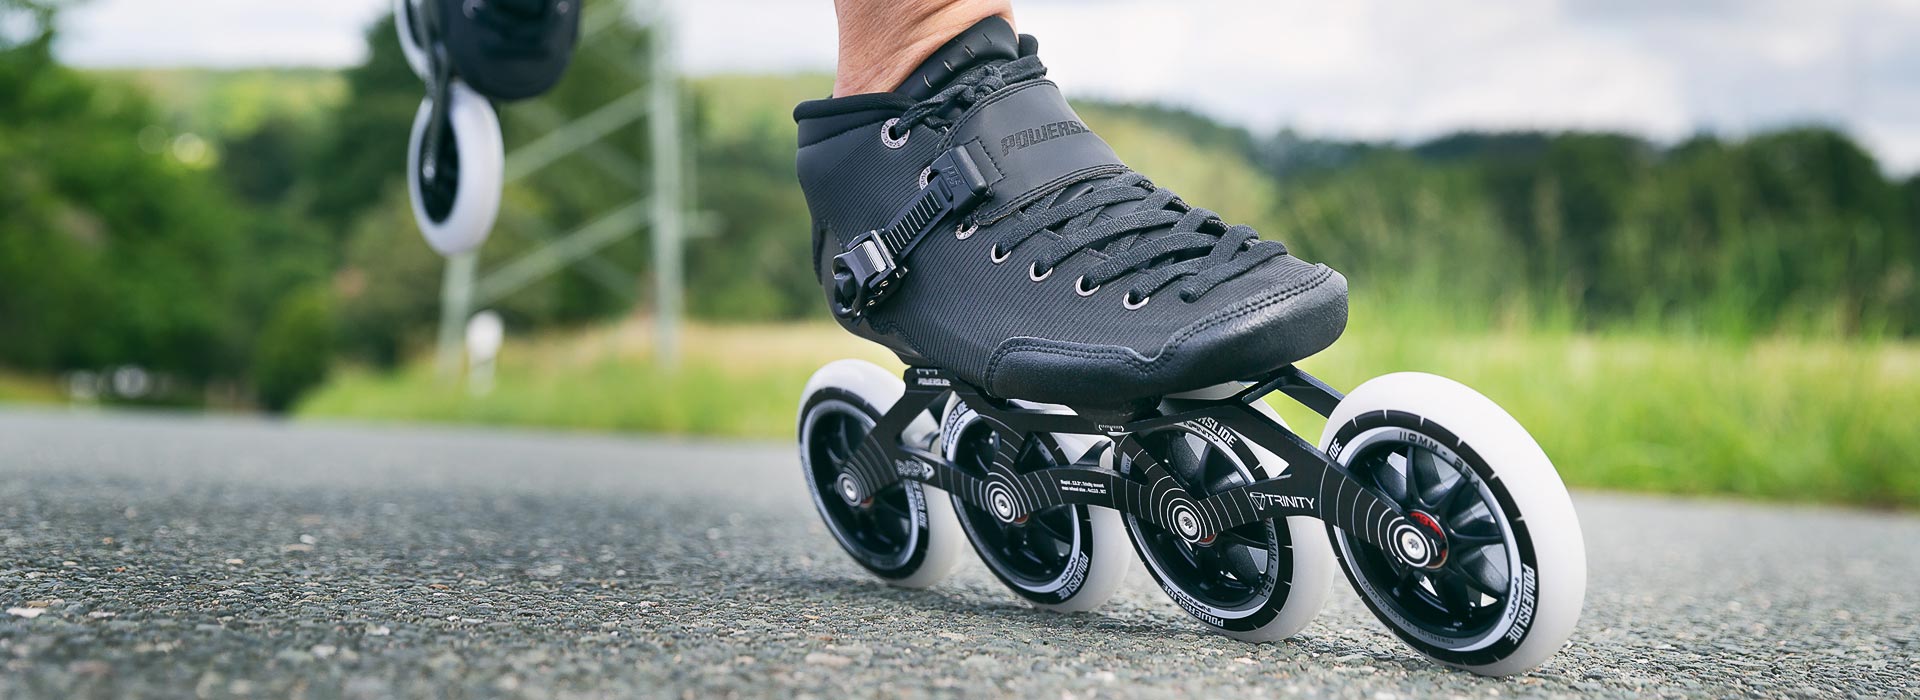 Close up image of a four-wheel Powerslide inline speed skate